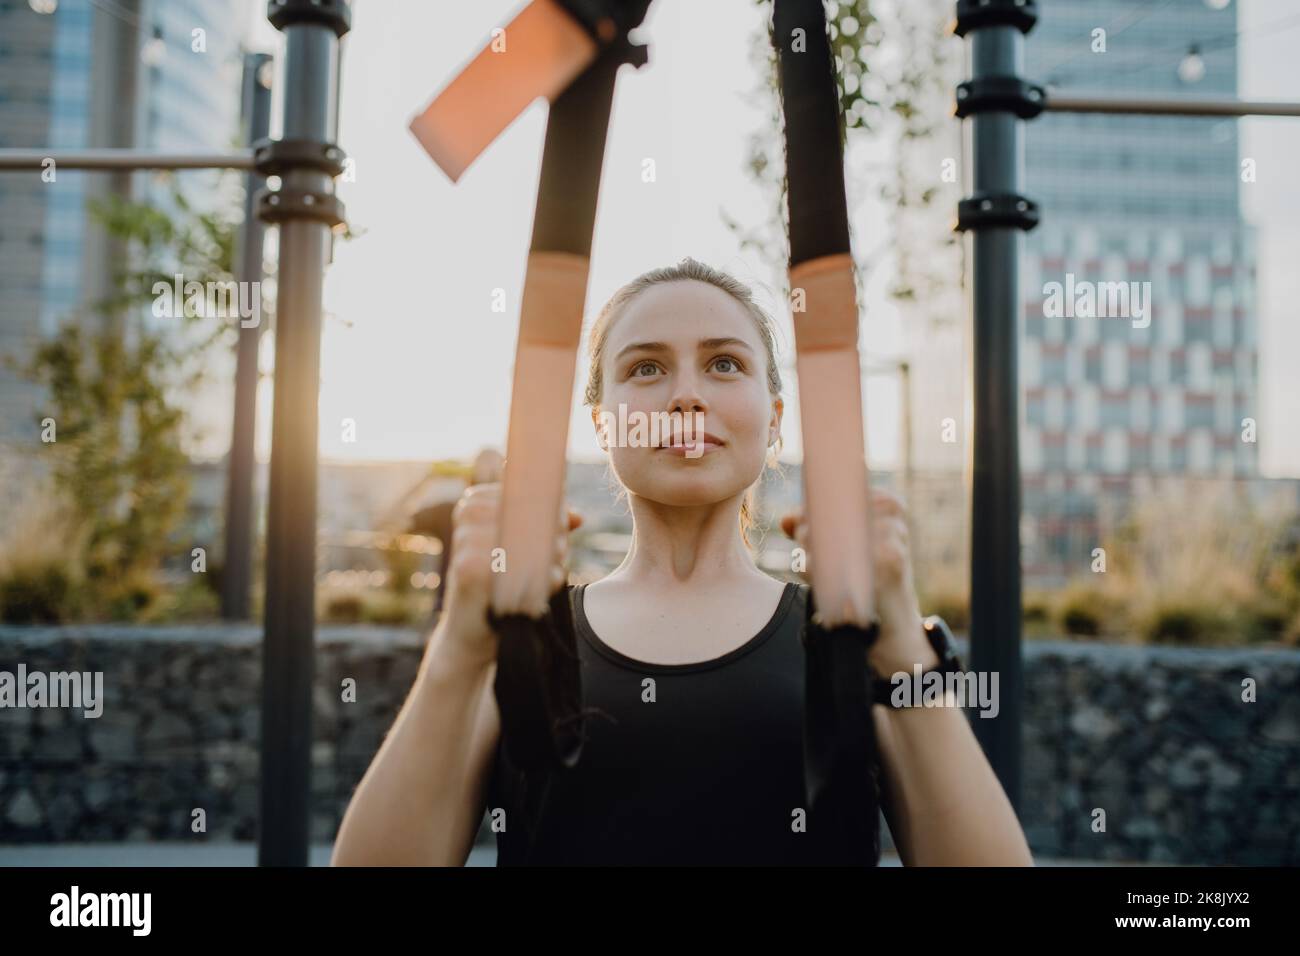 Young woman doing exercises at outdoor work-out city park. Stock Photo